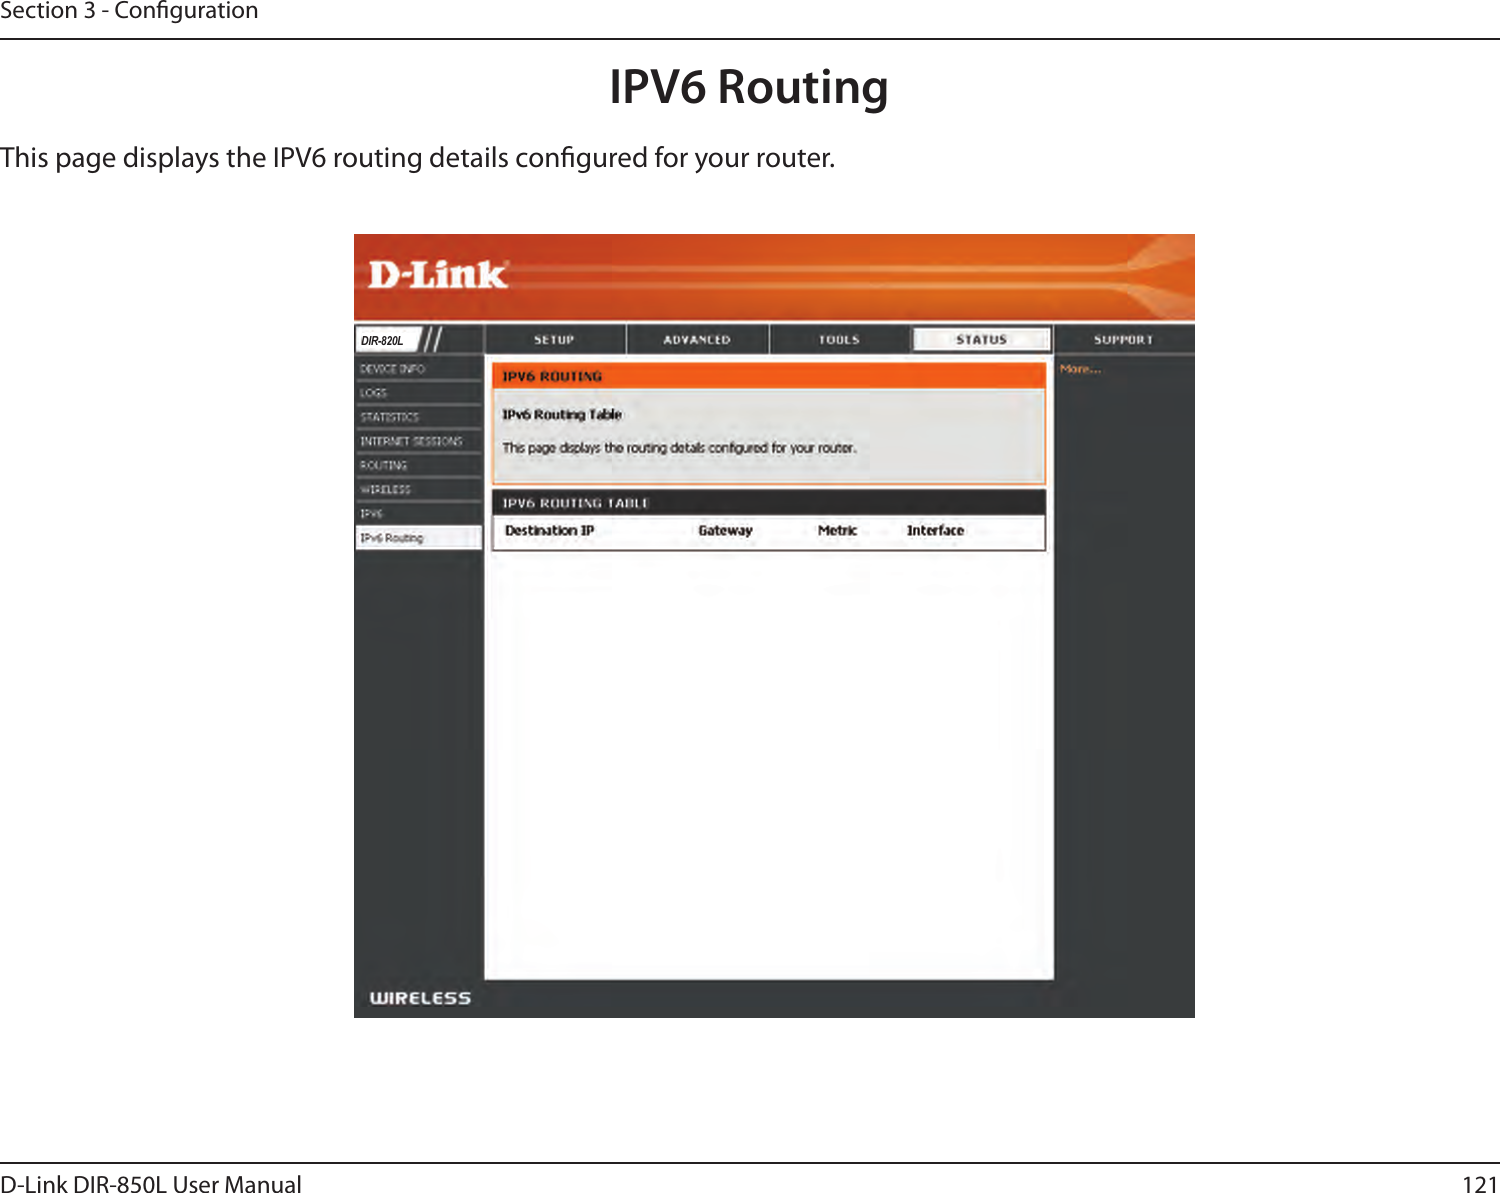 121D-Link DIR-850L User ManualSection 3 - CongurationIPV6 RoutingThis page displays the IPV6 routing details congured for your router. DIR-820L